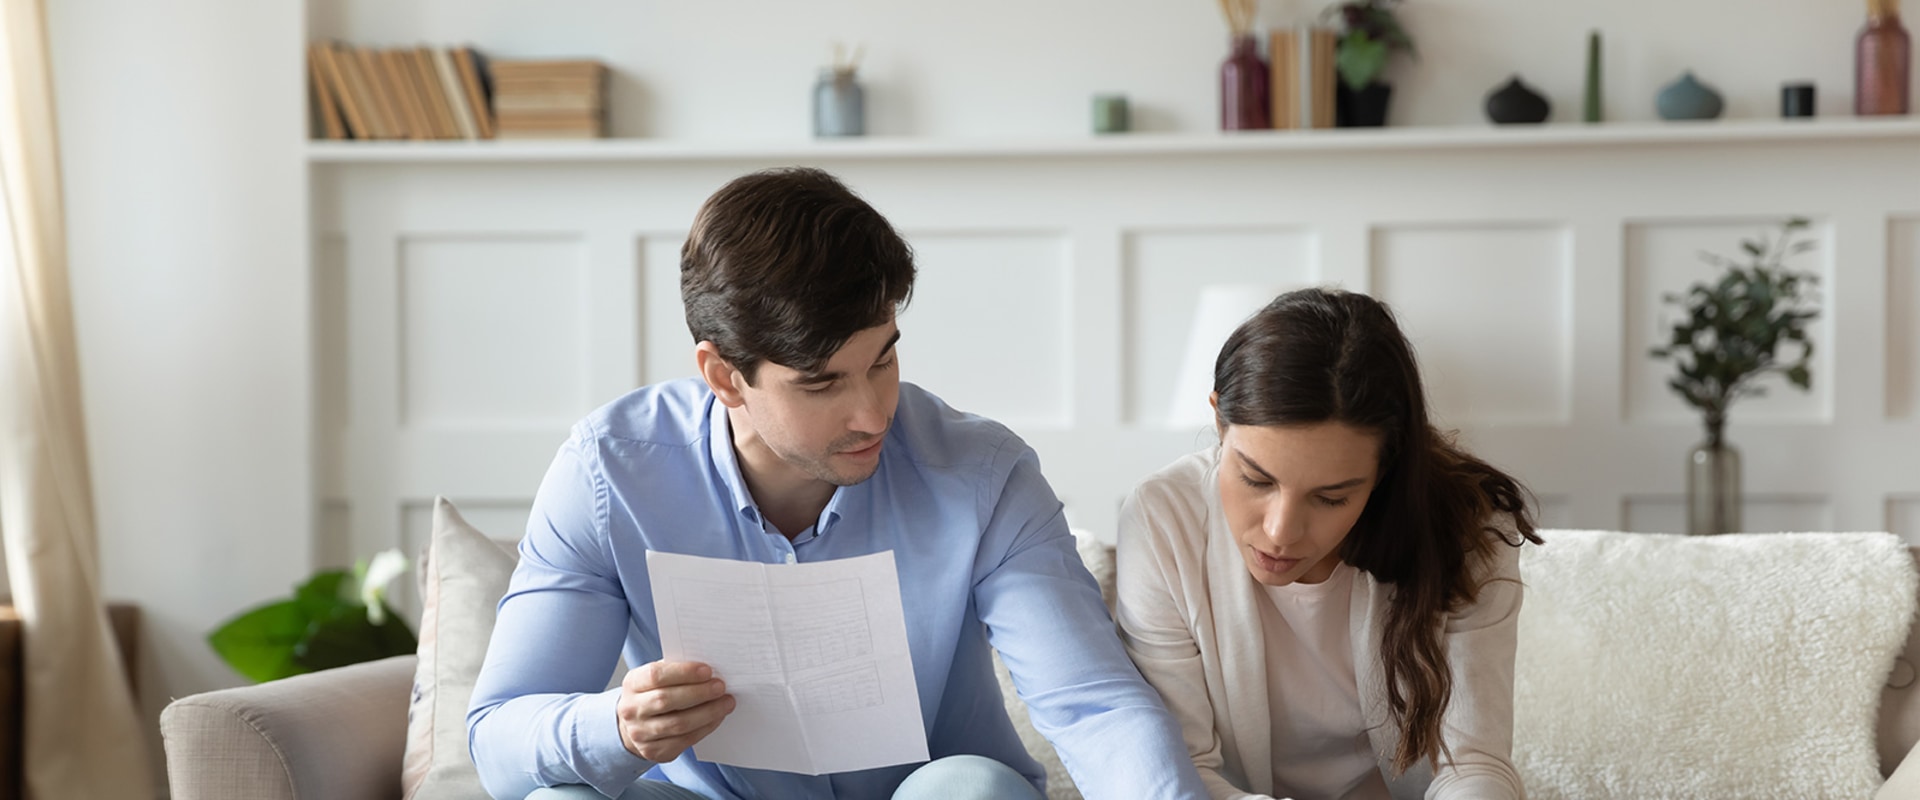 What are bankruptcy options for individuals?